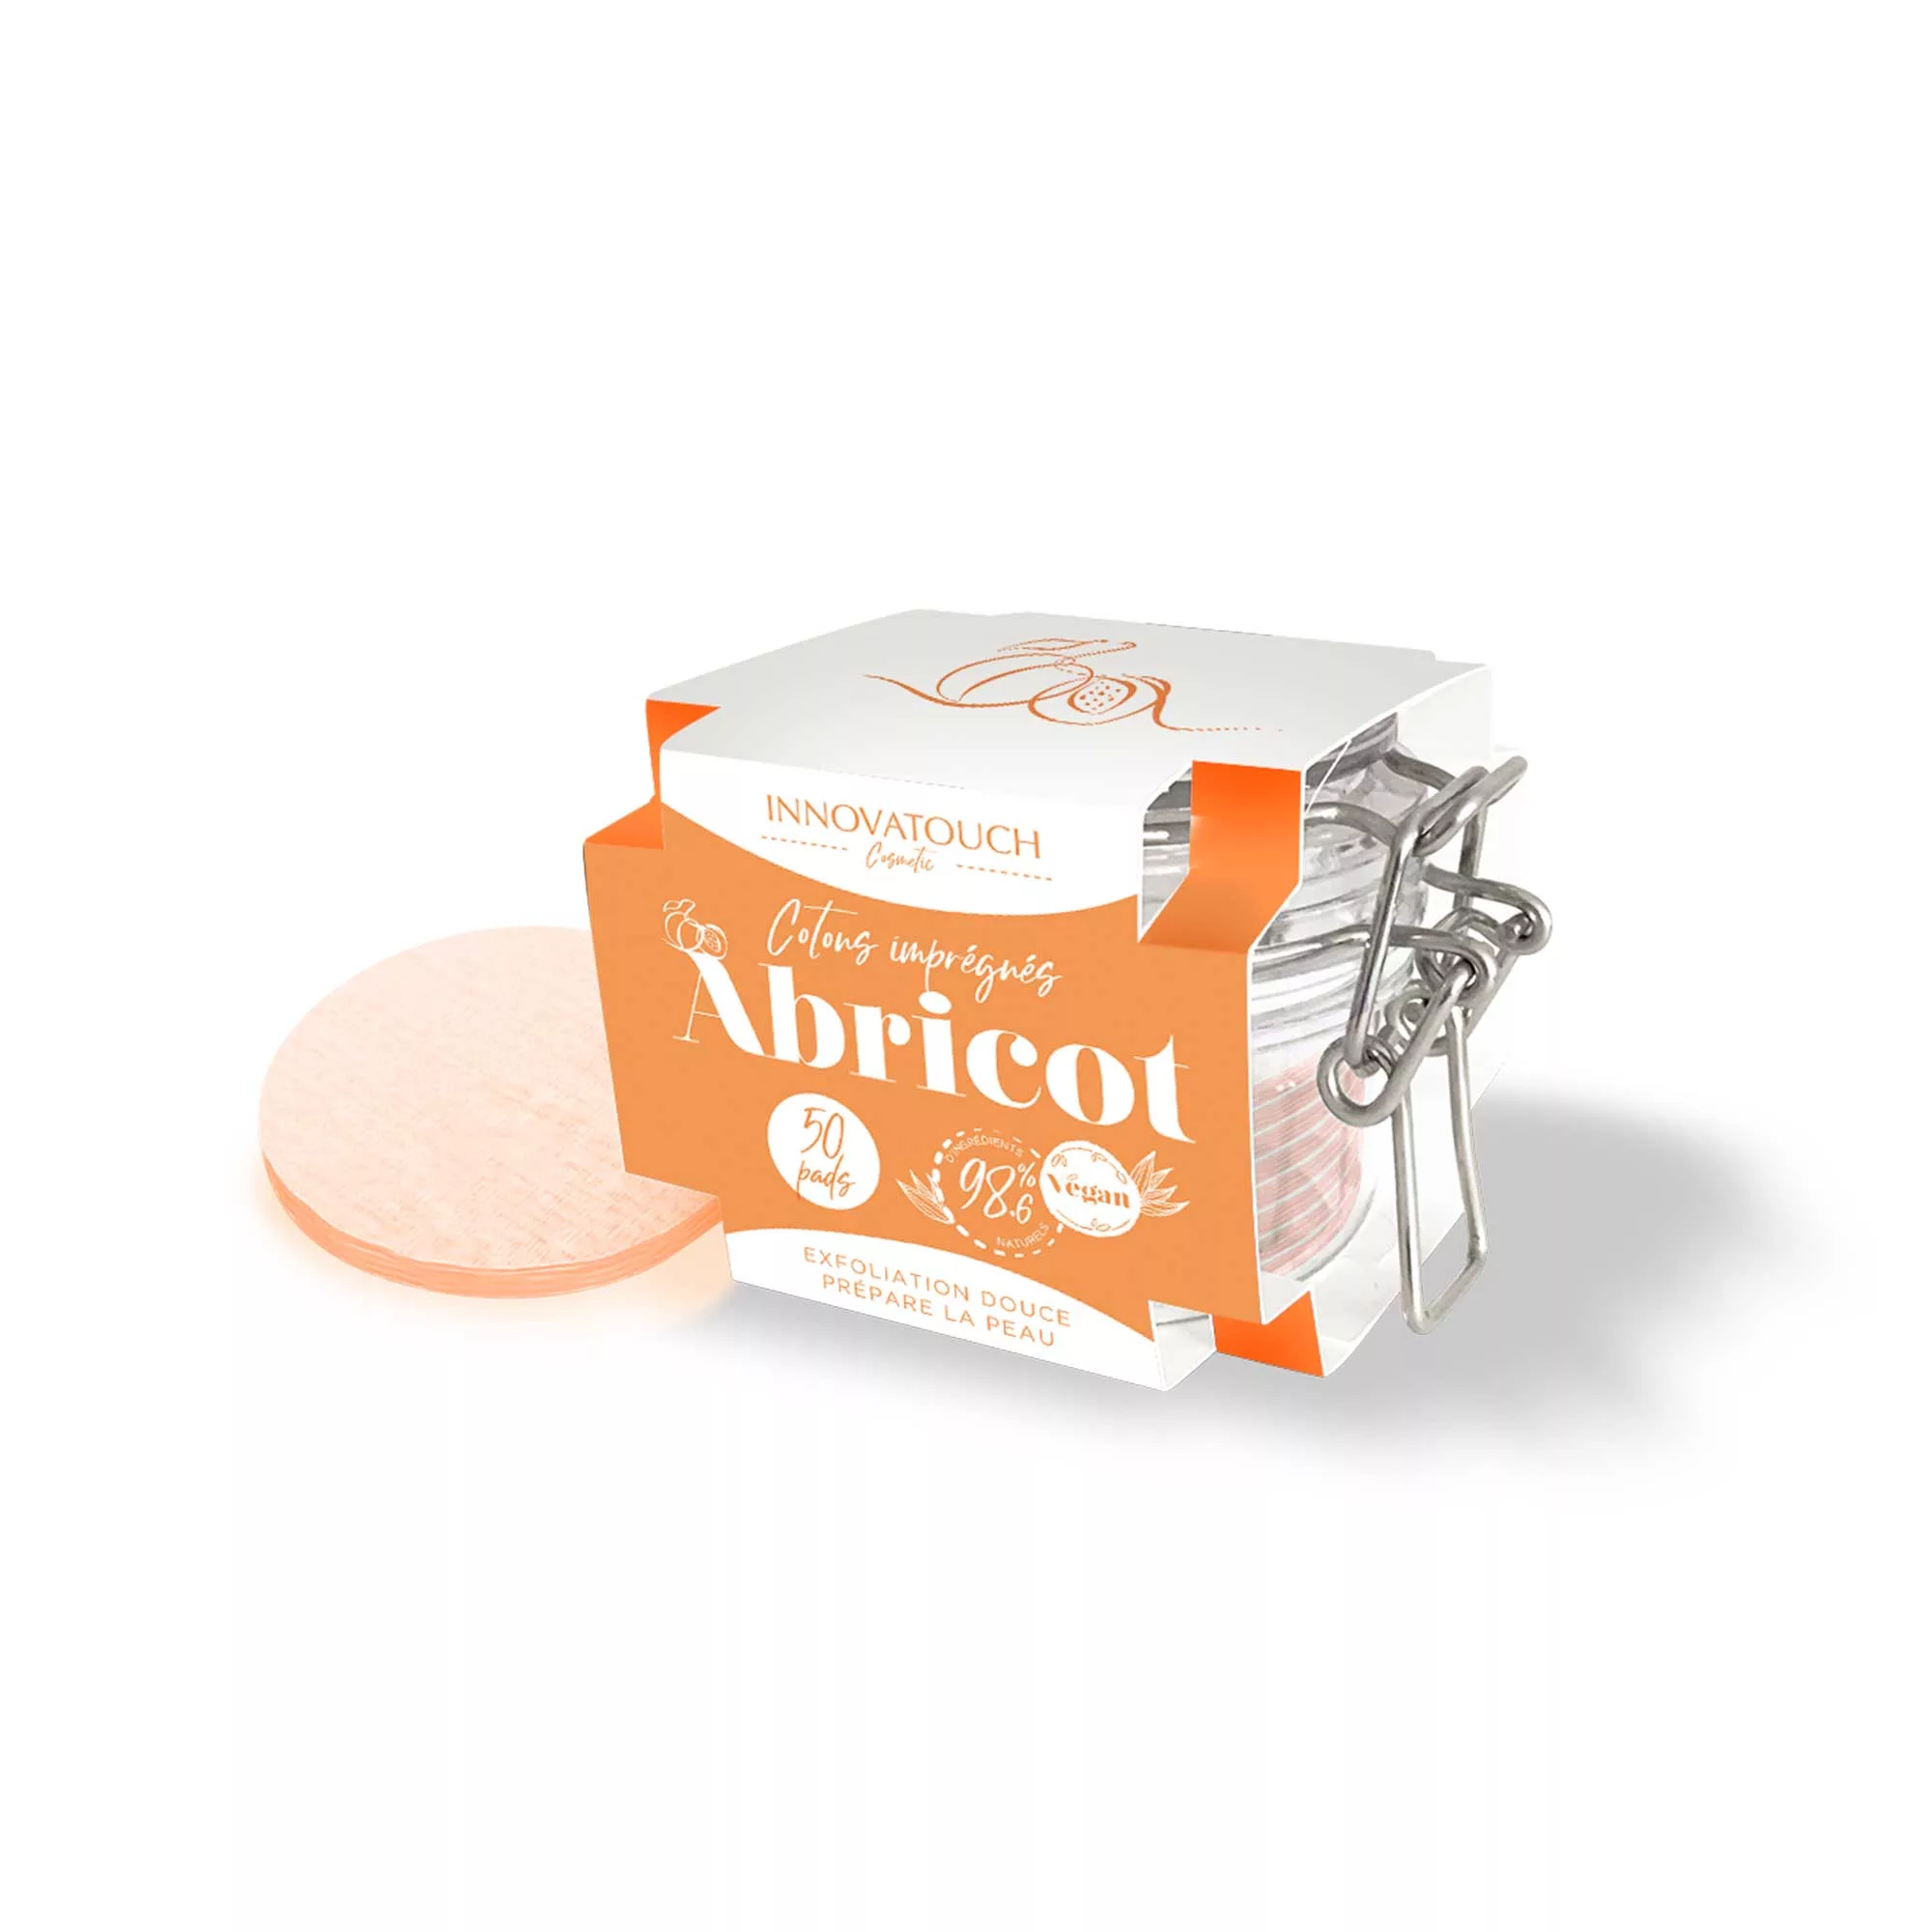 ABRICOT-contons-impregnes-innovatouch-cosmetic